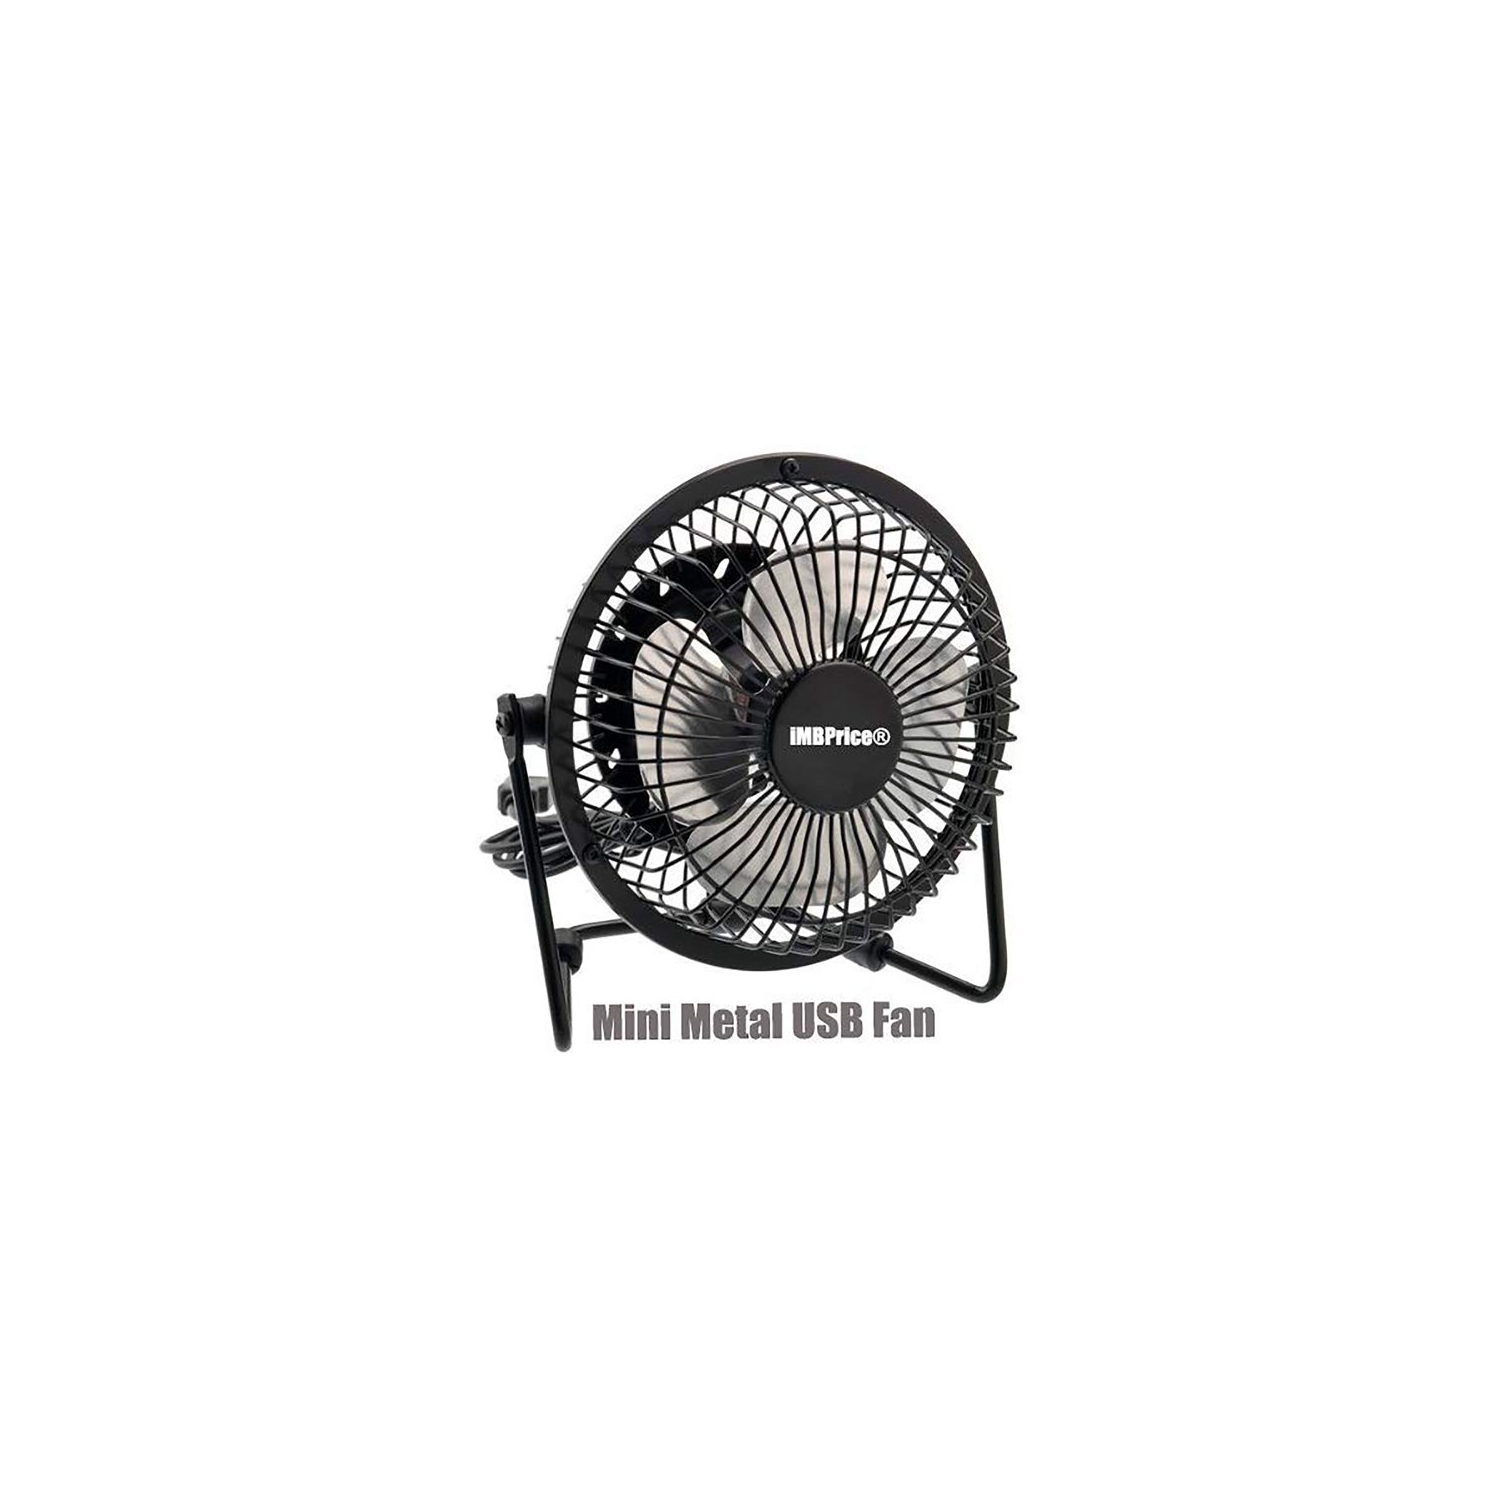 iMBAPrice Classic Hi Speed 4" USB Mini Desktop Metal Fan with ON/Off Switch for PC/Laptop (Black)